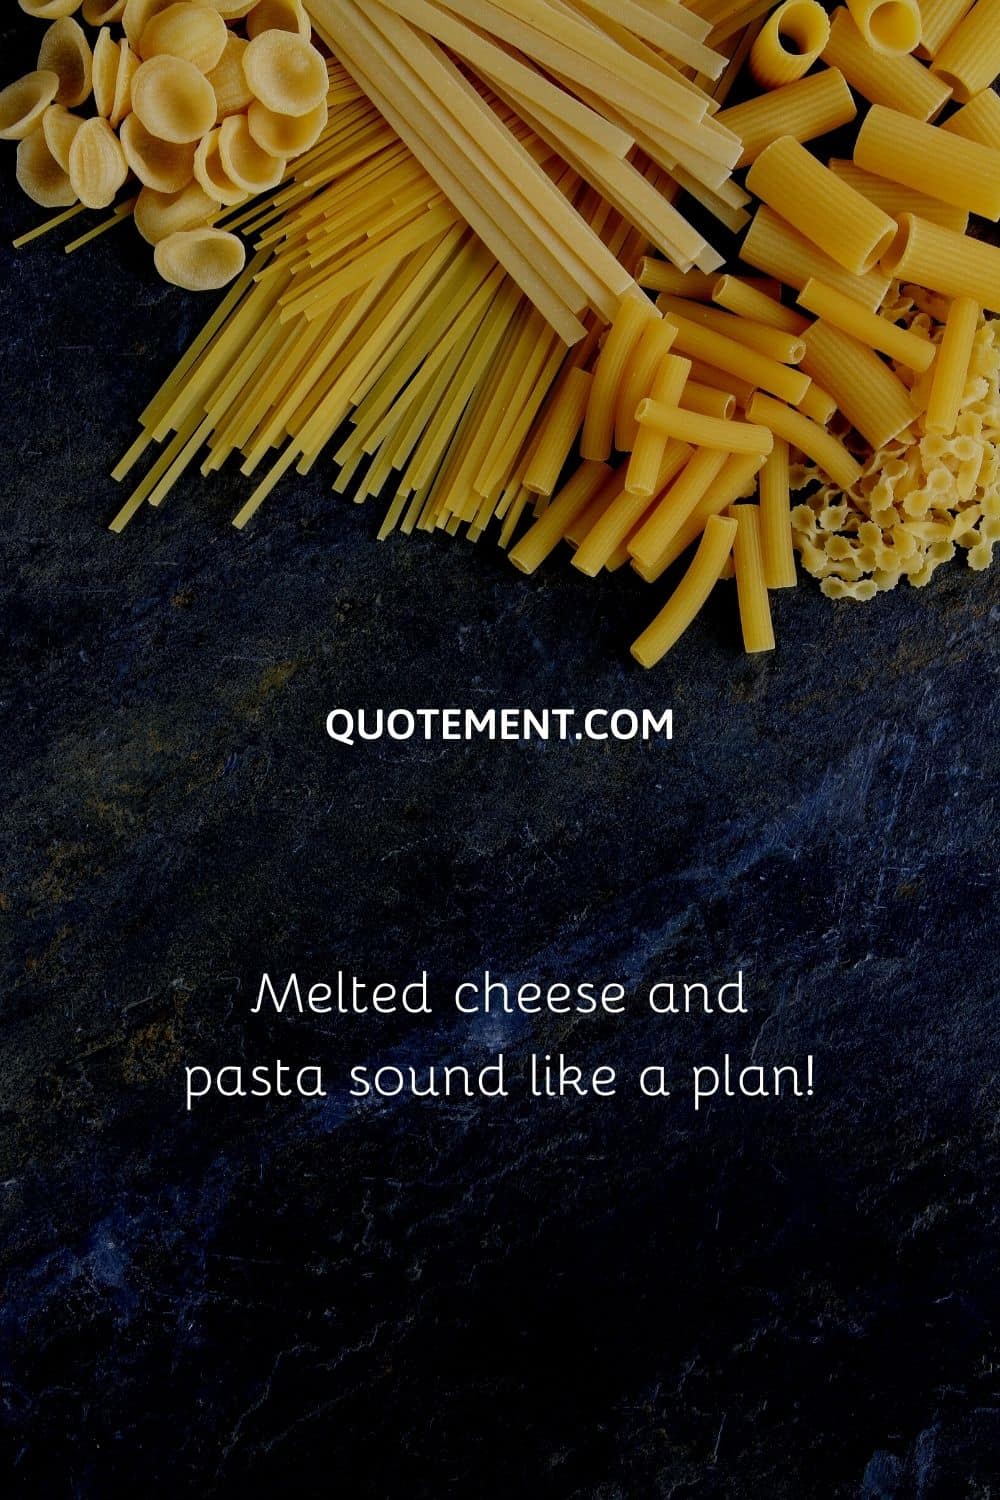 Melted cheese and pasta sound like a plan